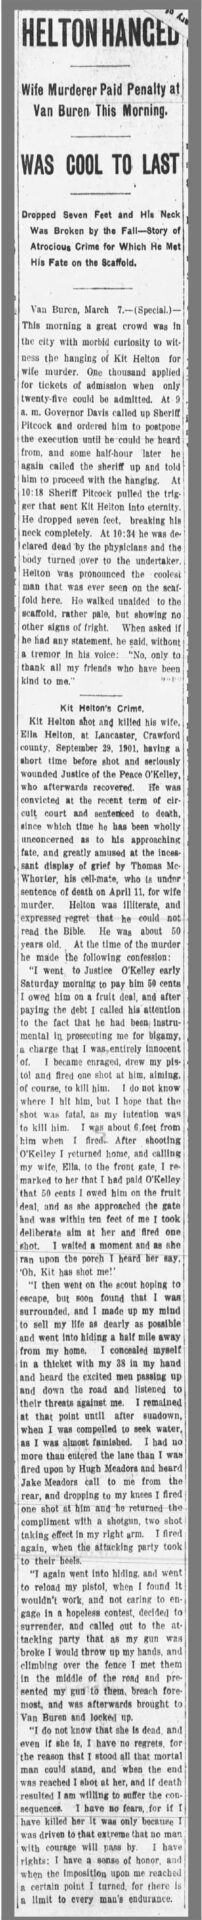 "Helton Hanged" newspaper clipping